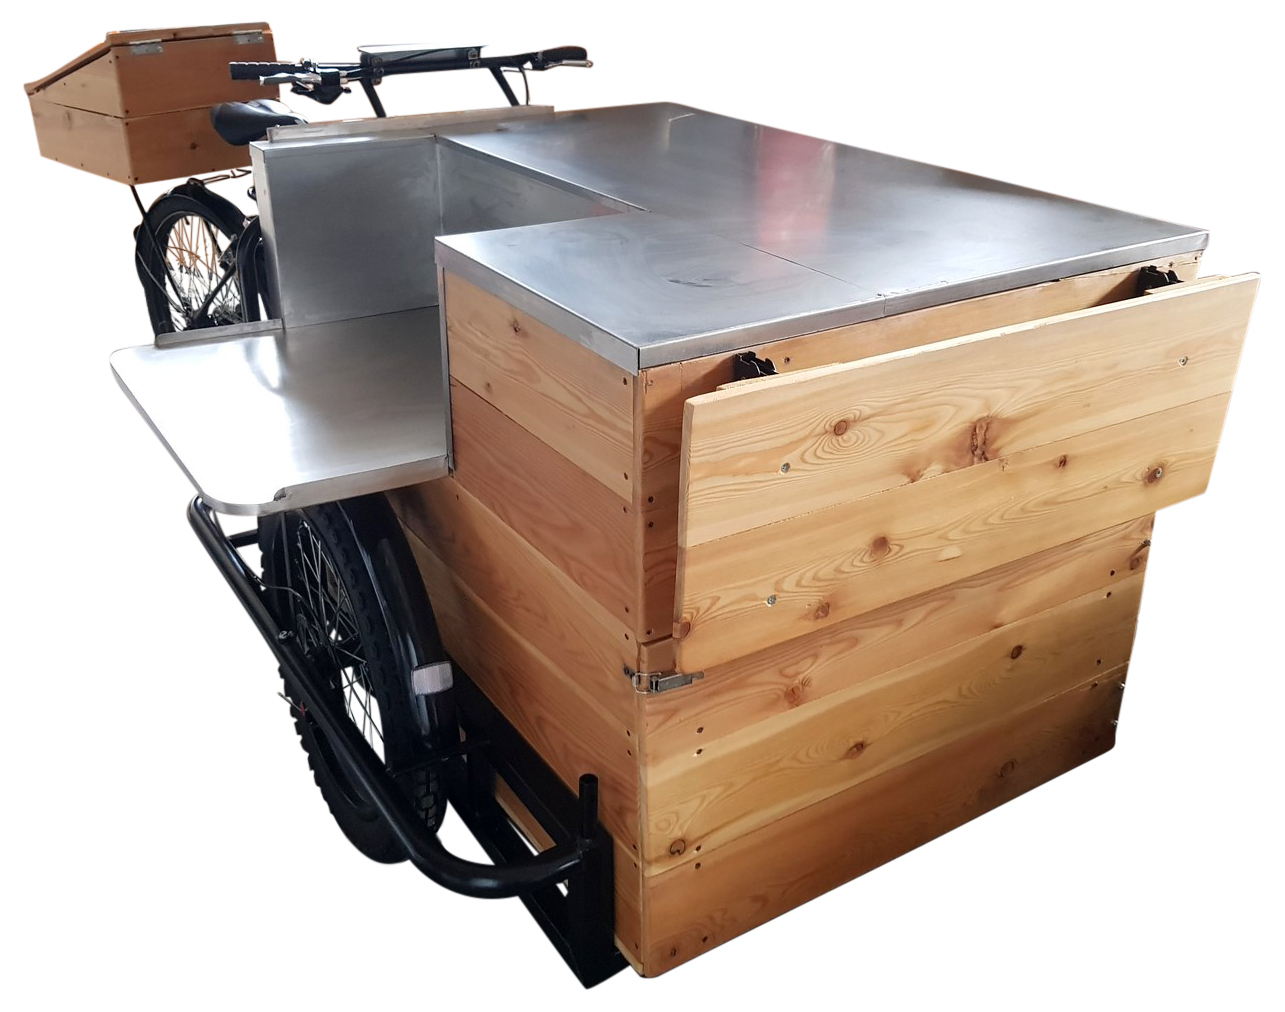 BANCO_HAWAI_TRICYCLE_WOODEN_WORKBENCH_IN_LEGNO_TRICICLO_STREETFOOD_4